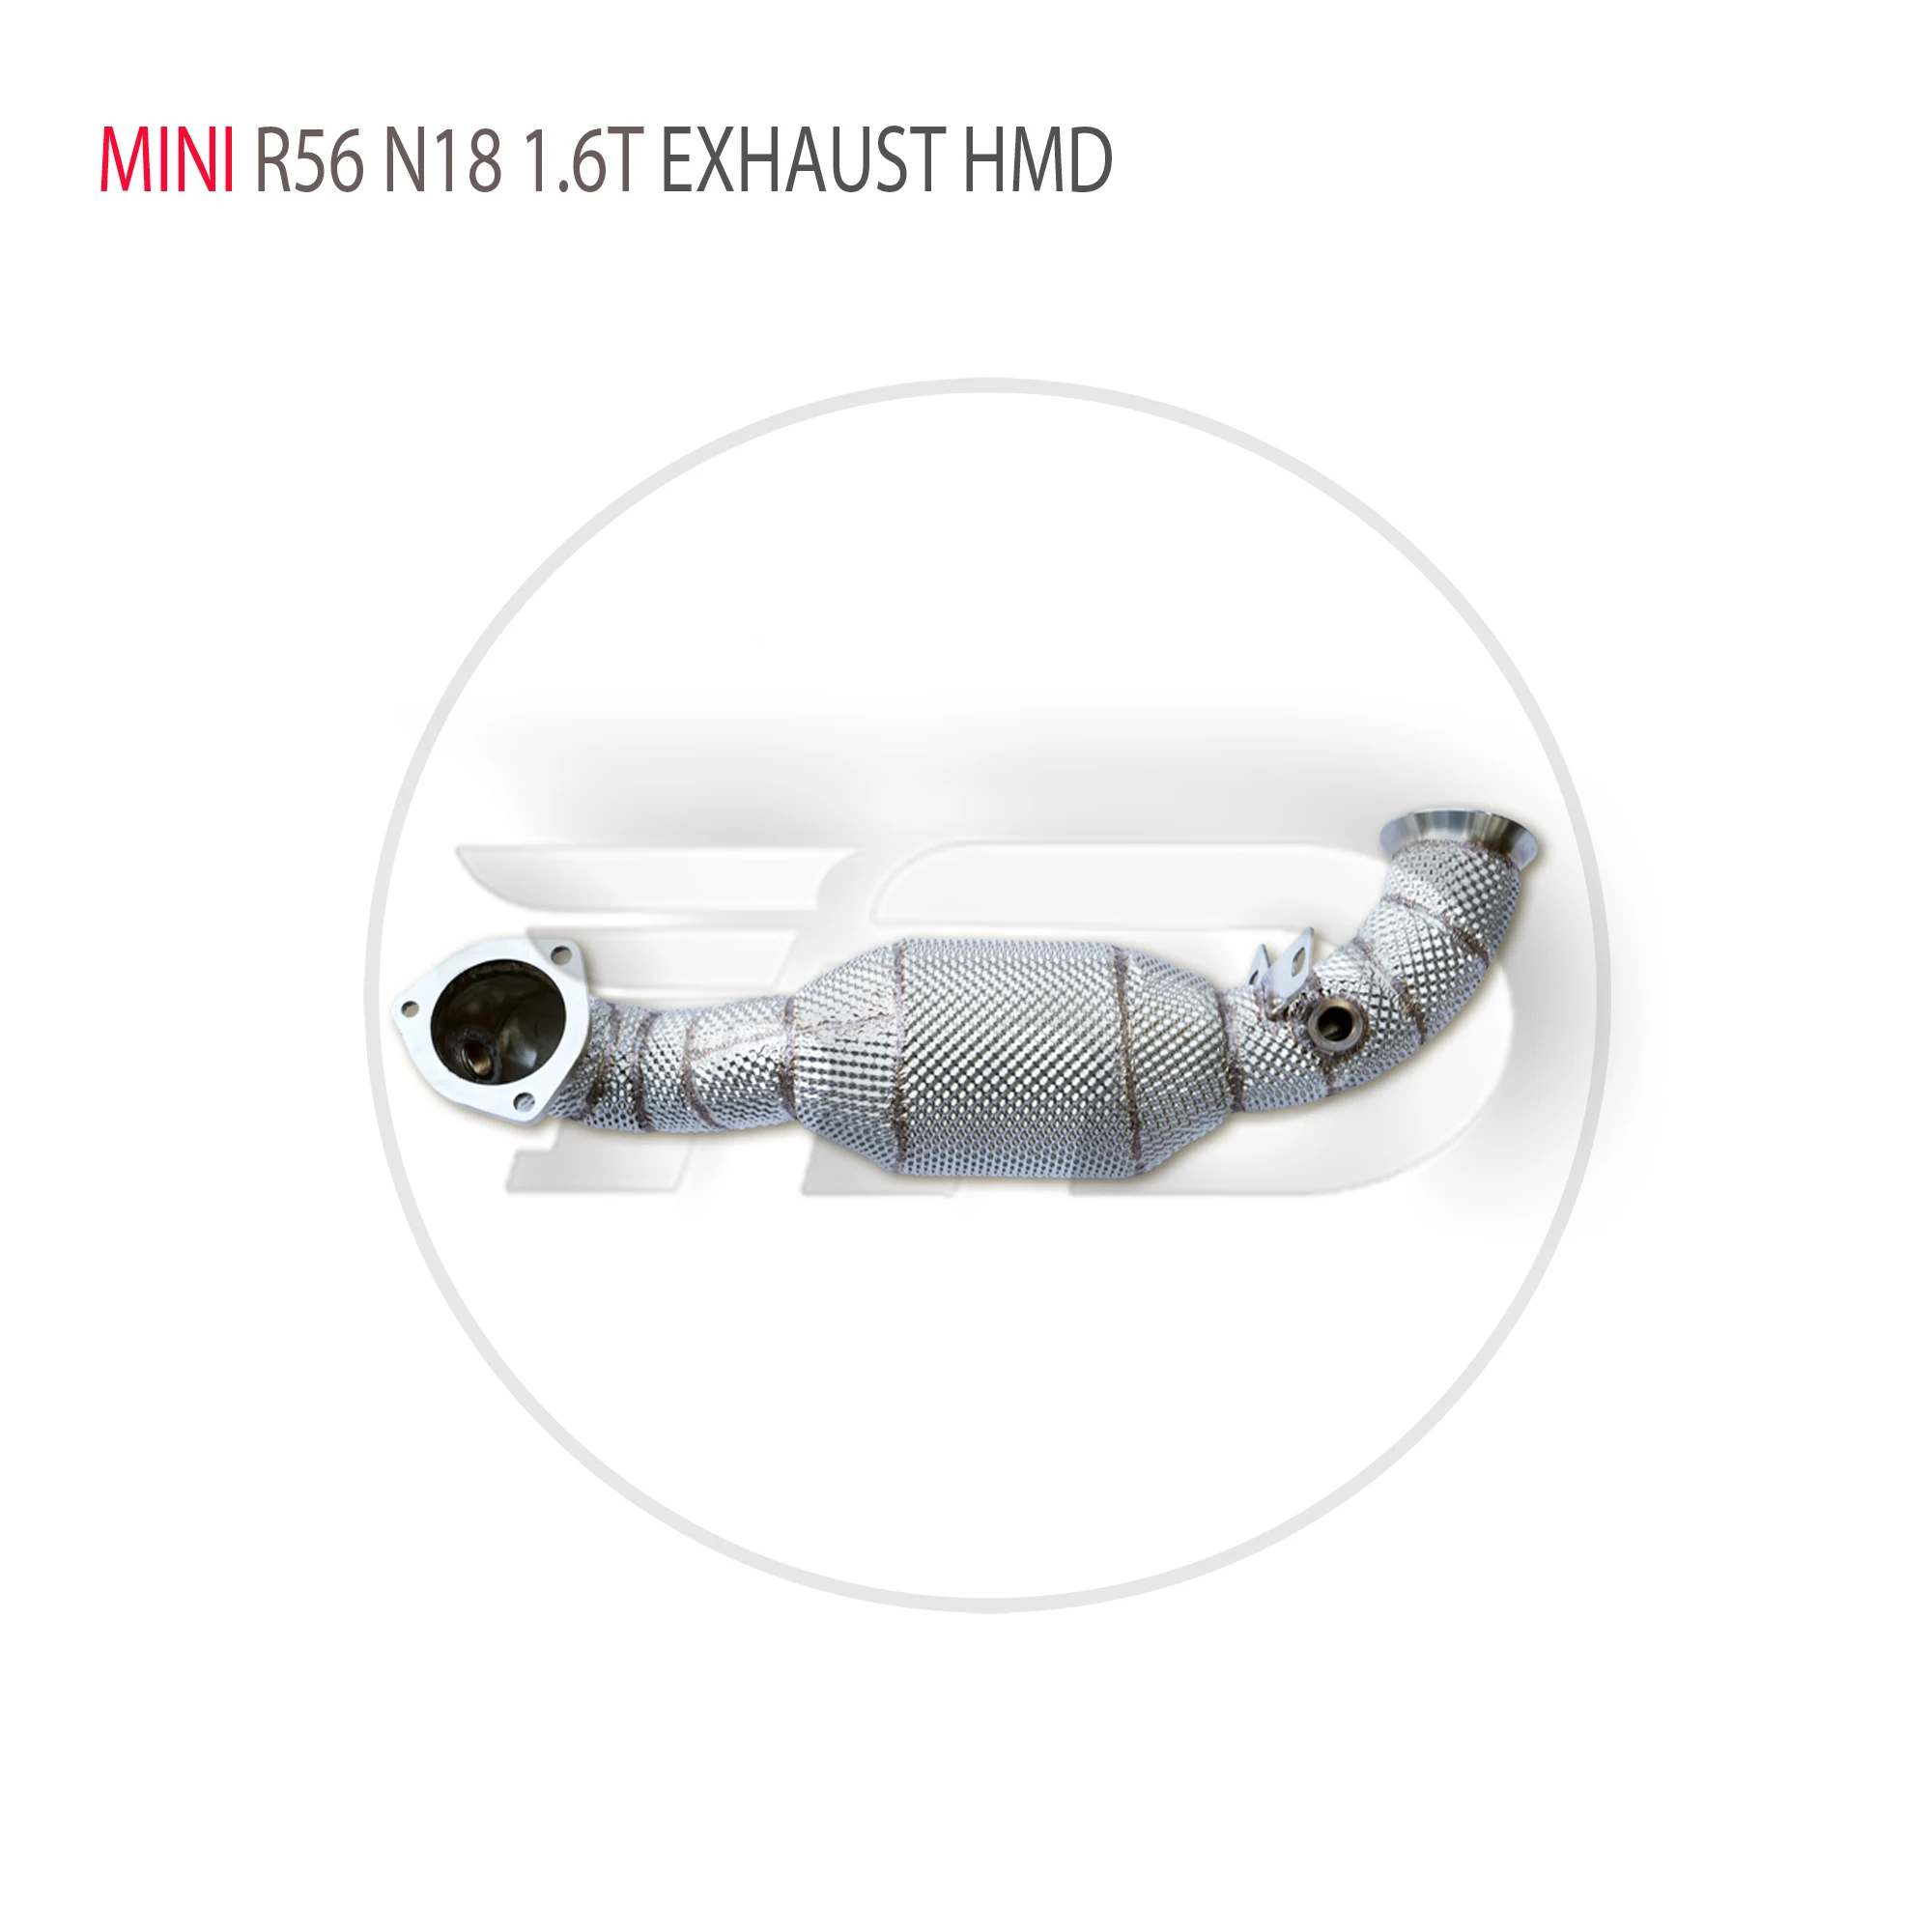 

HMD Exhaust System High Flow Performance Downpipe for MINI Cooper S R56 R57 R60 N18 Engine 1.6T Car Accessories With Cat Headers